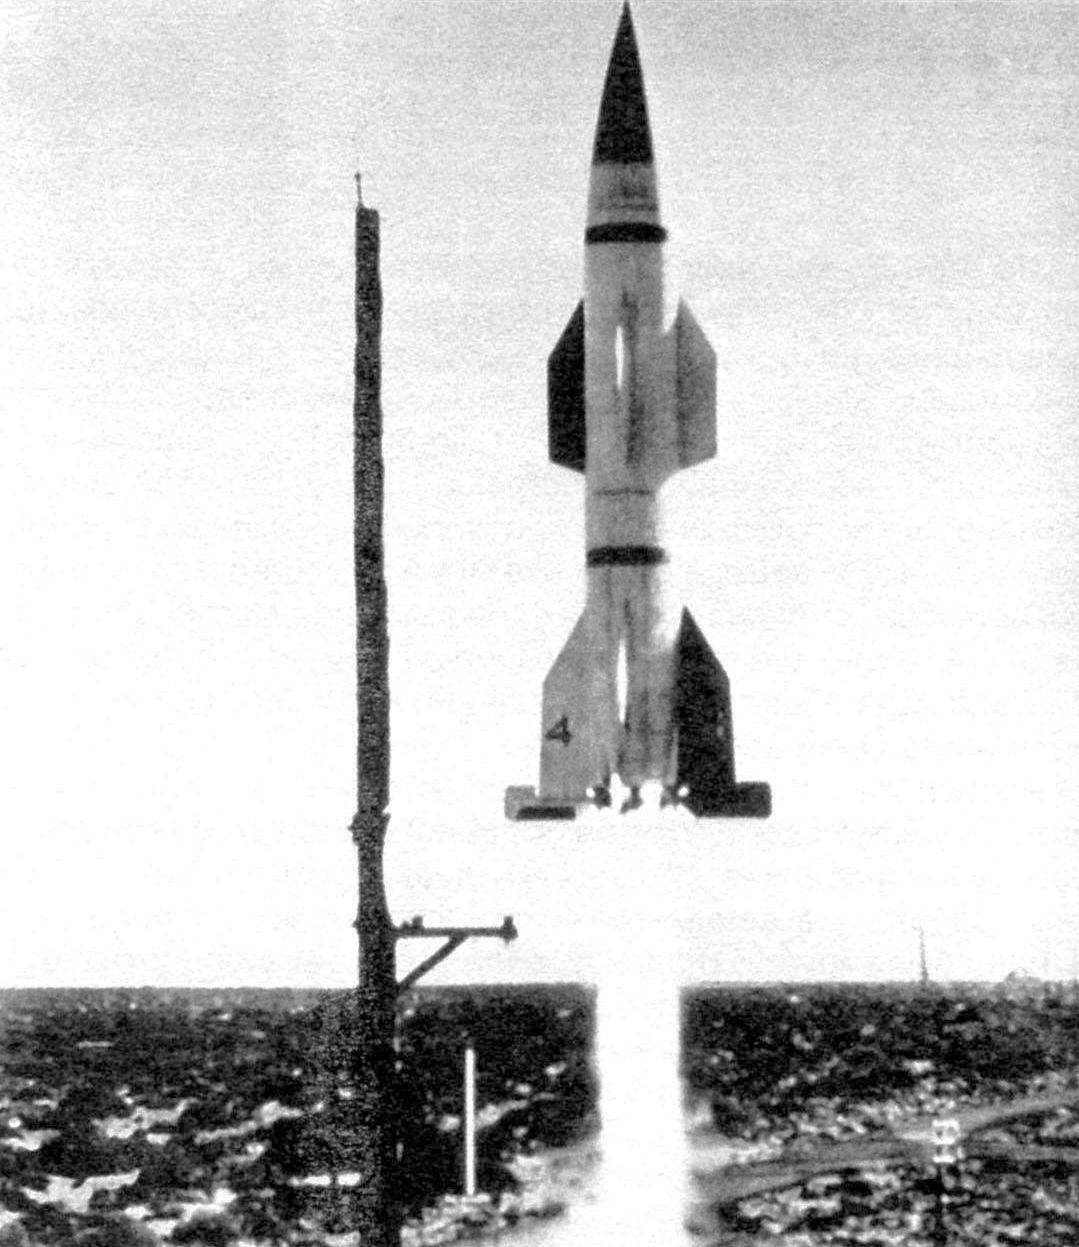 The first launch of the us version of the rocket Wasserfall - Hermes Al. Polygon white sand provin the ground (White Sand Proving Ground - WSPG), may 1, 1950